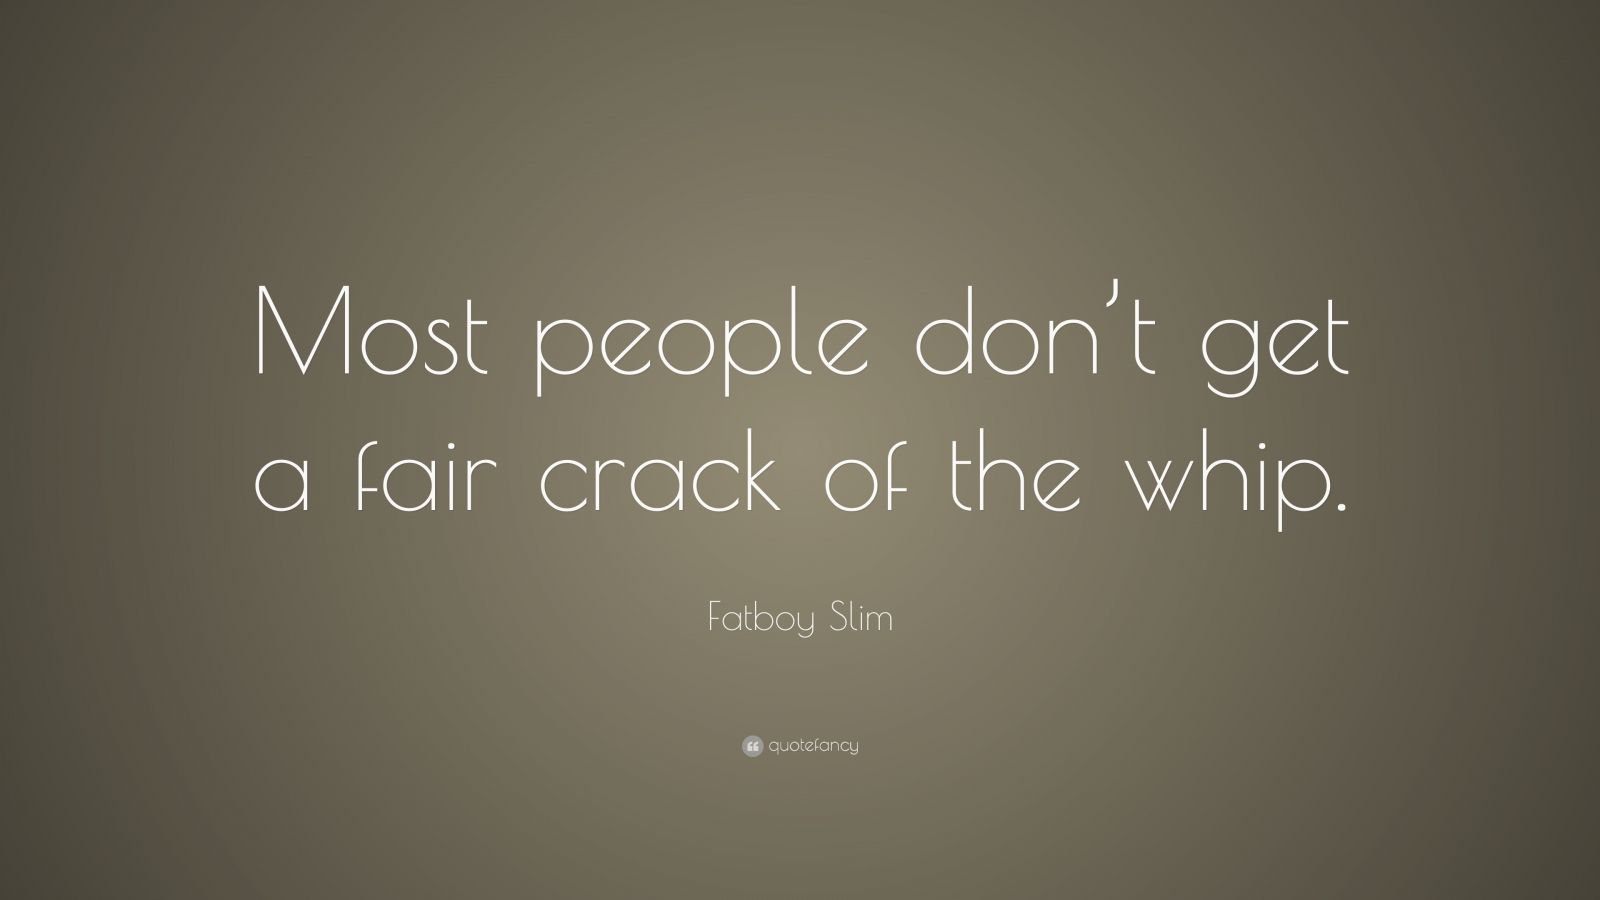 Fatboy Slim Quote: “Most people don’t get a fair crack of the whip.” (7